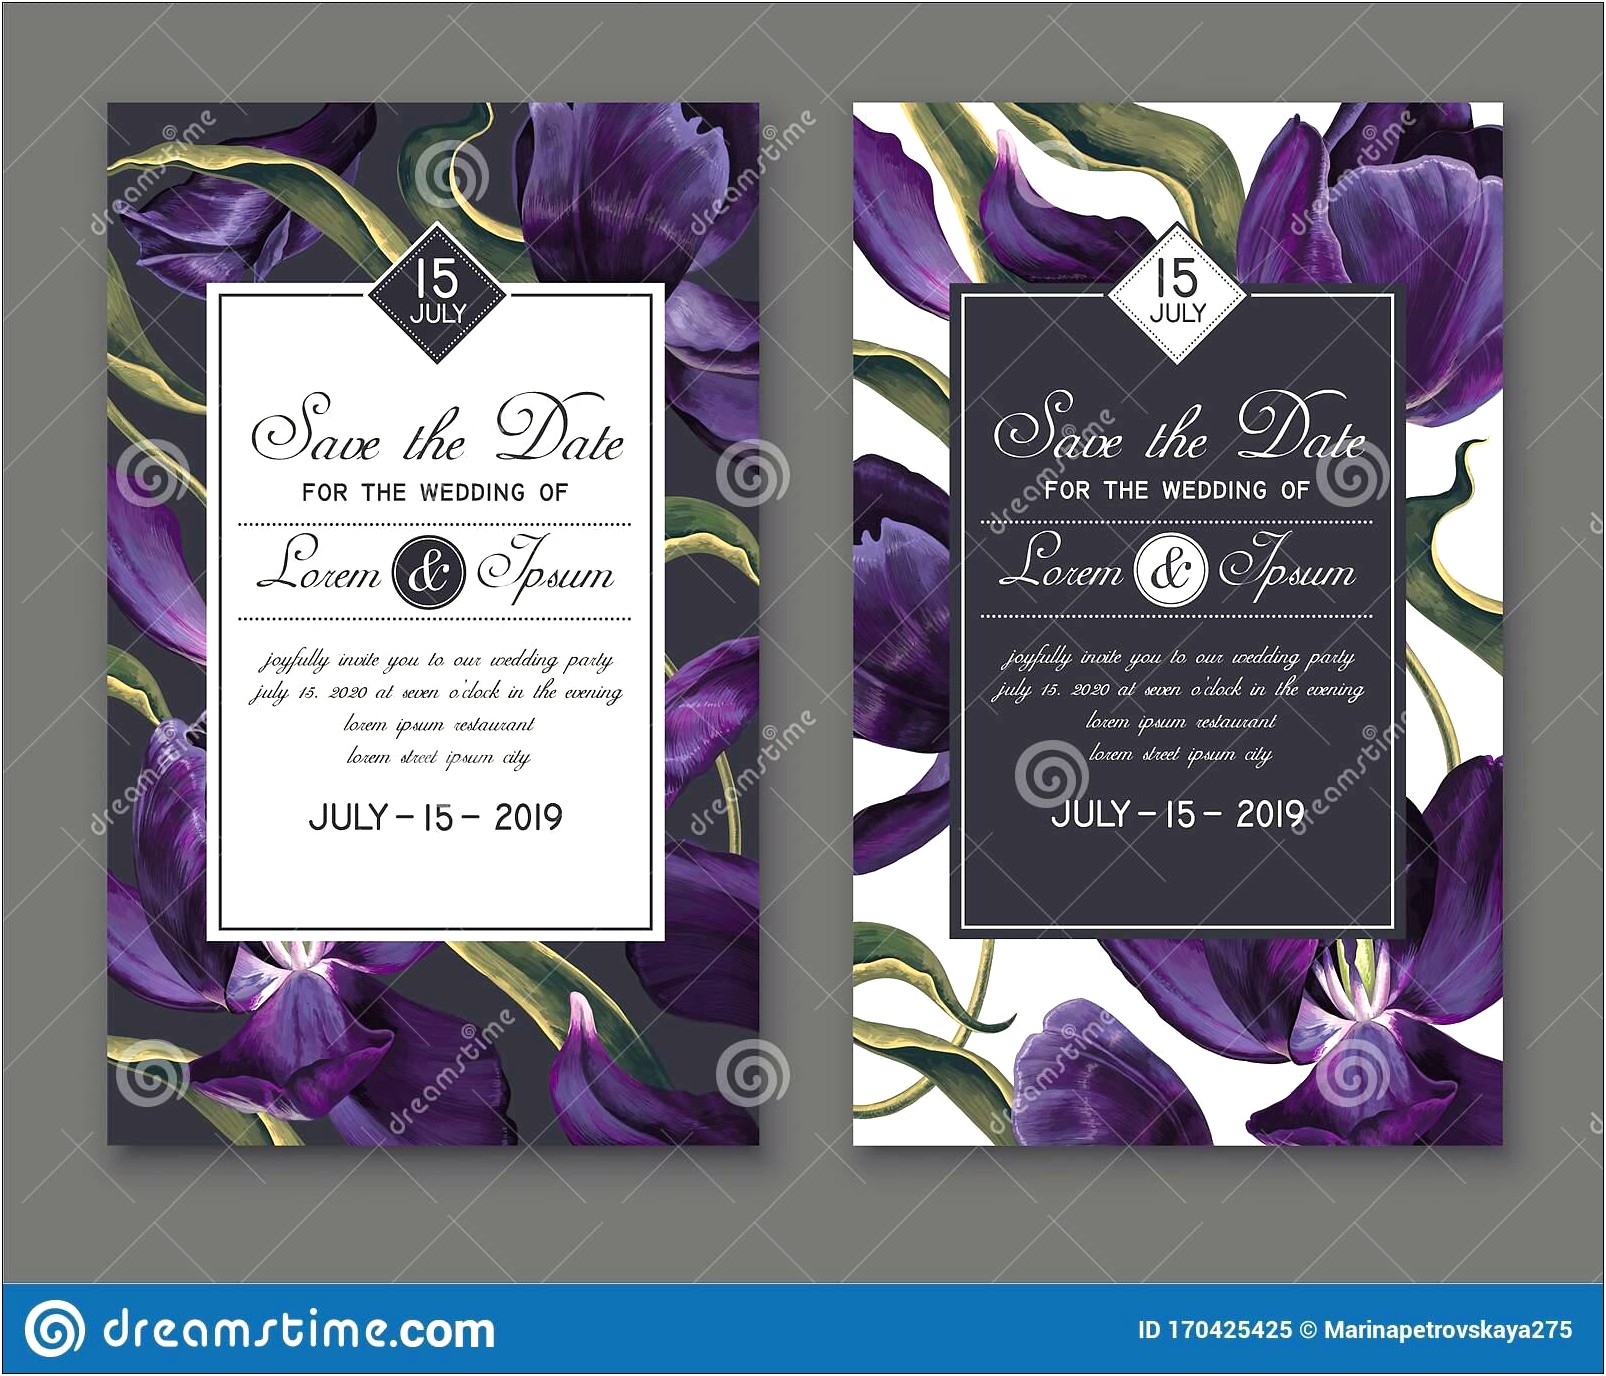 Free Downloadable Save The Date Templates For Postcards